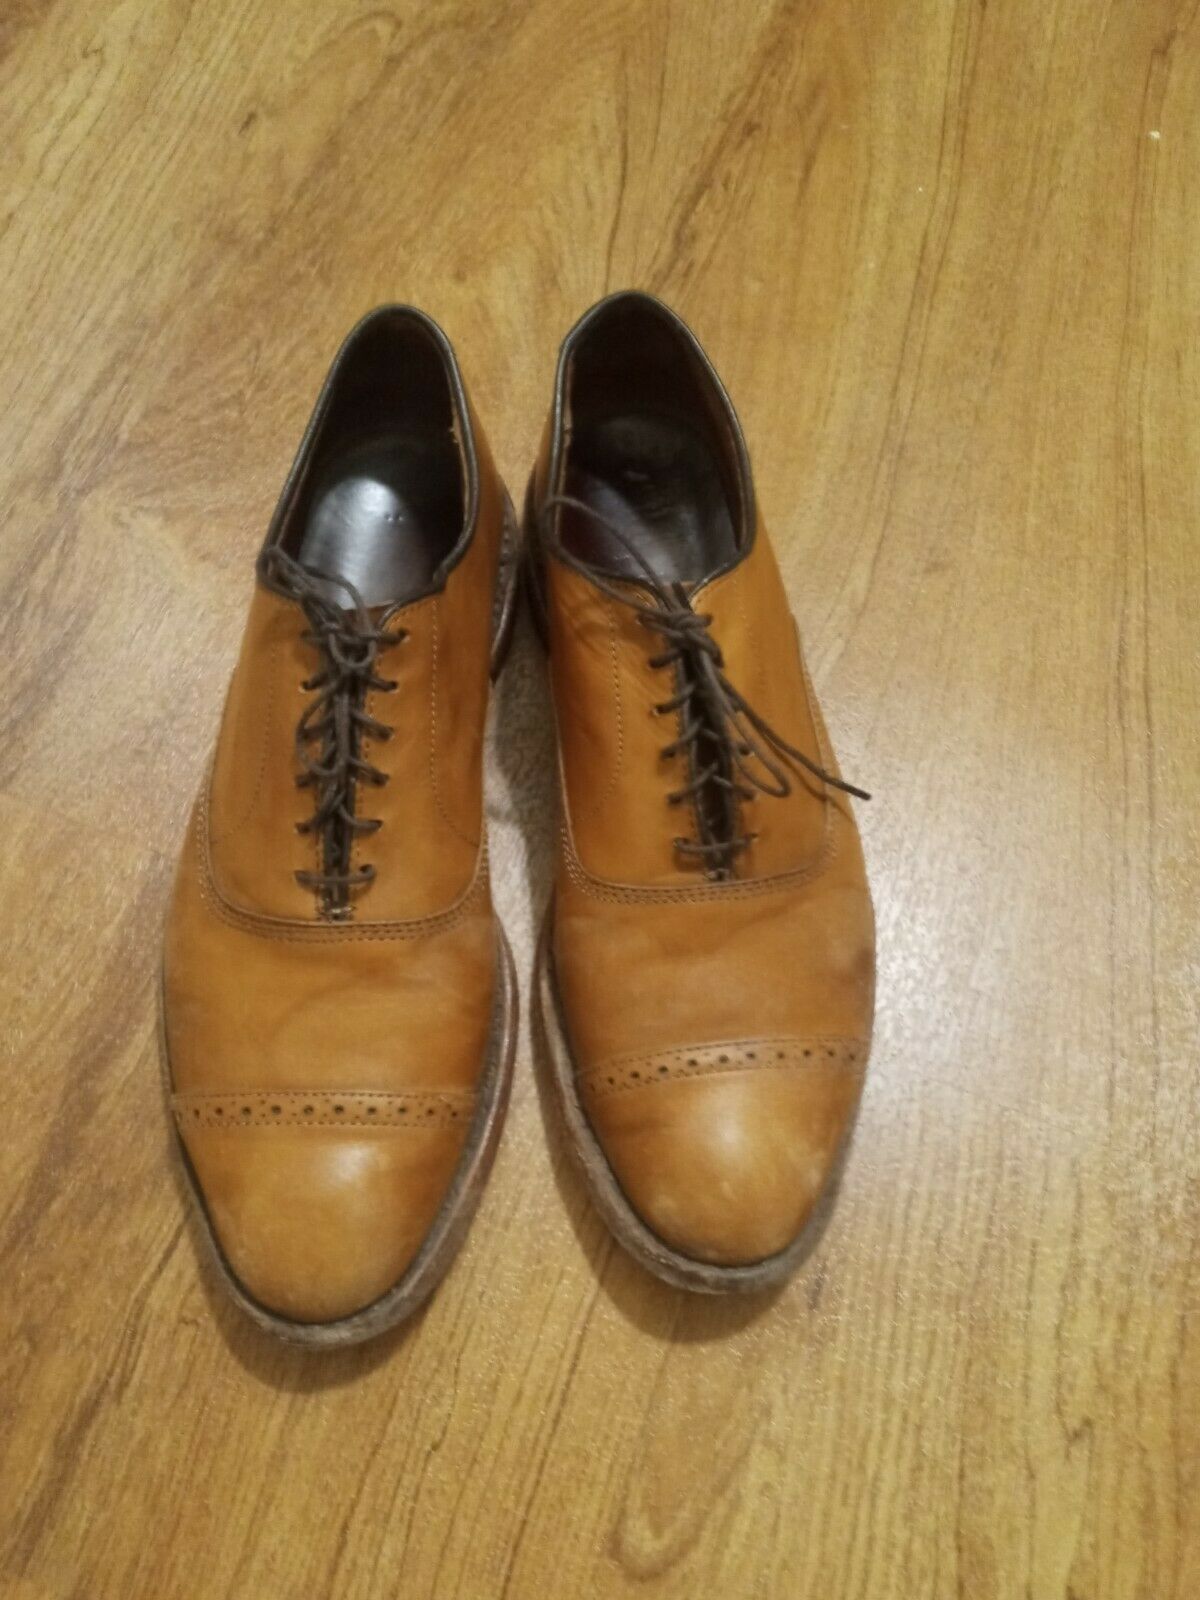 Allen Edmonds Brown Leather Dress Shoes Men's 10 D, Made In USA Good Condition